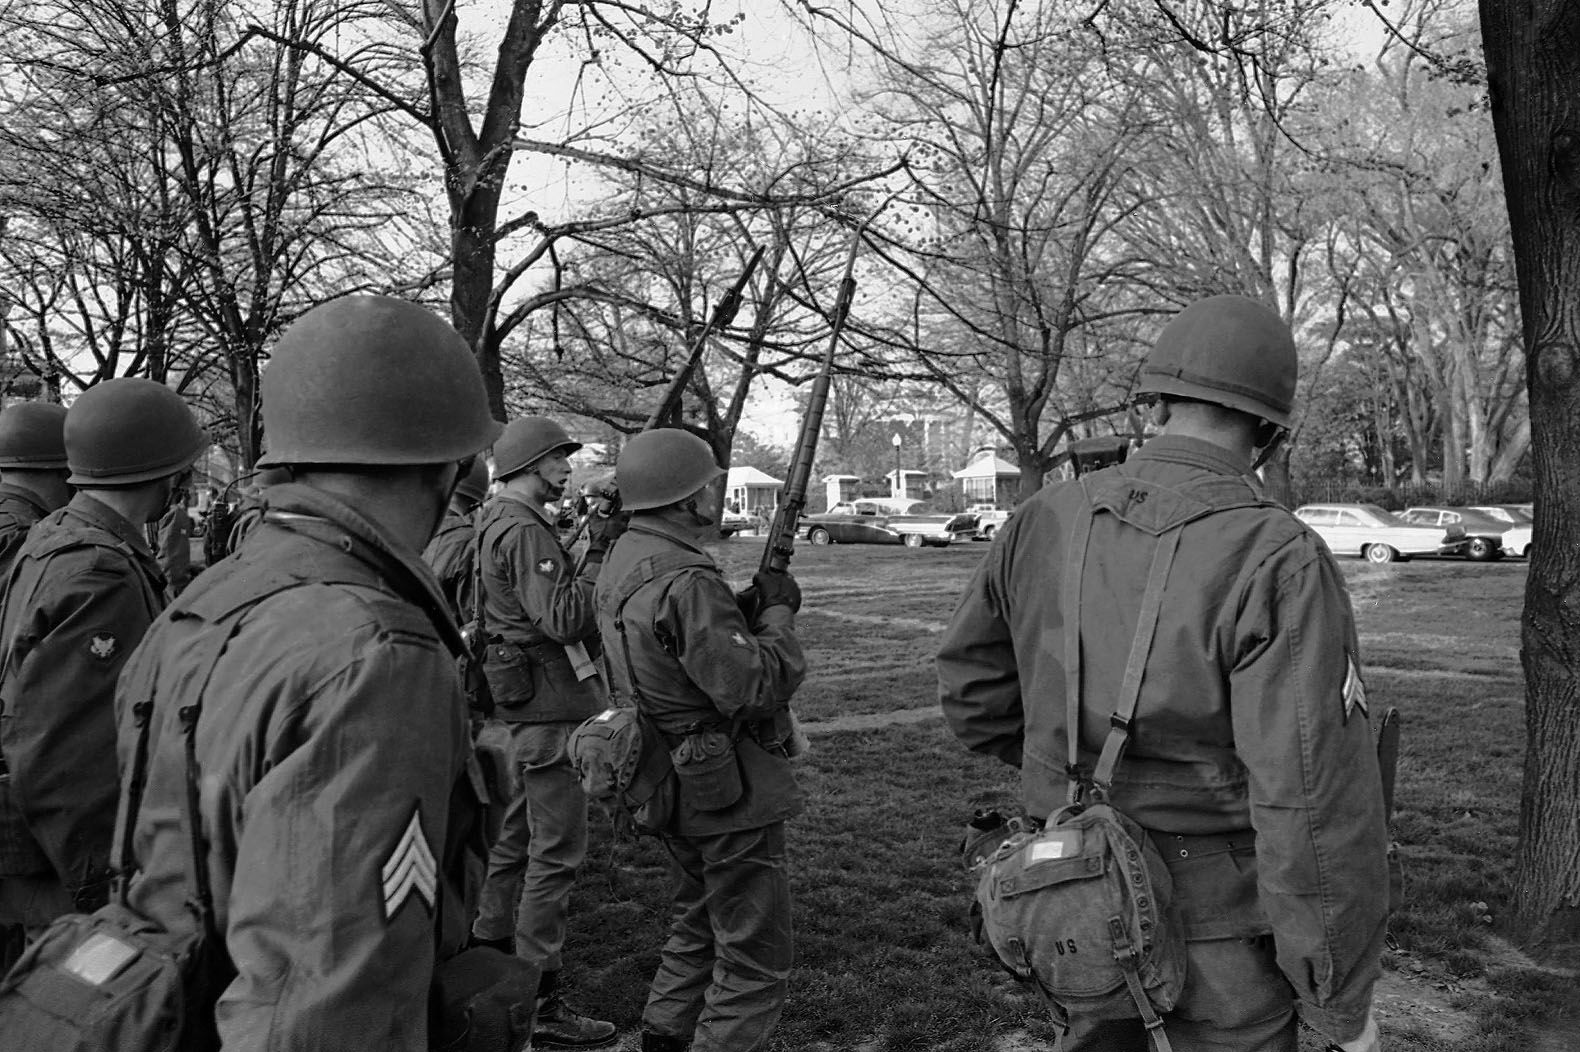 Soldiers of the 3rd Infantry Regiment from Fort Myer, Va., take up posts in Lafayette Park near the White House in background on April 5, 1968. They were part of the Federal troops ordered into the nation's capital by President Lyndon Johnson as looting and burning flared in the downtown area. (AP Photo/Henry Burroughs)